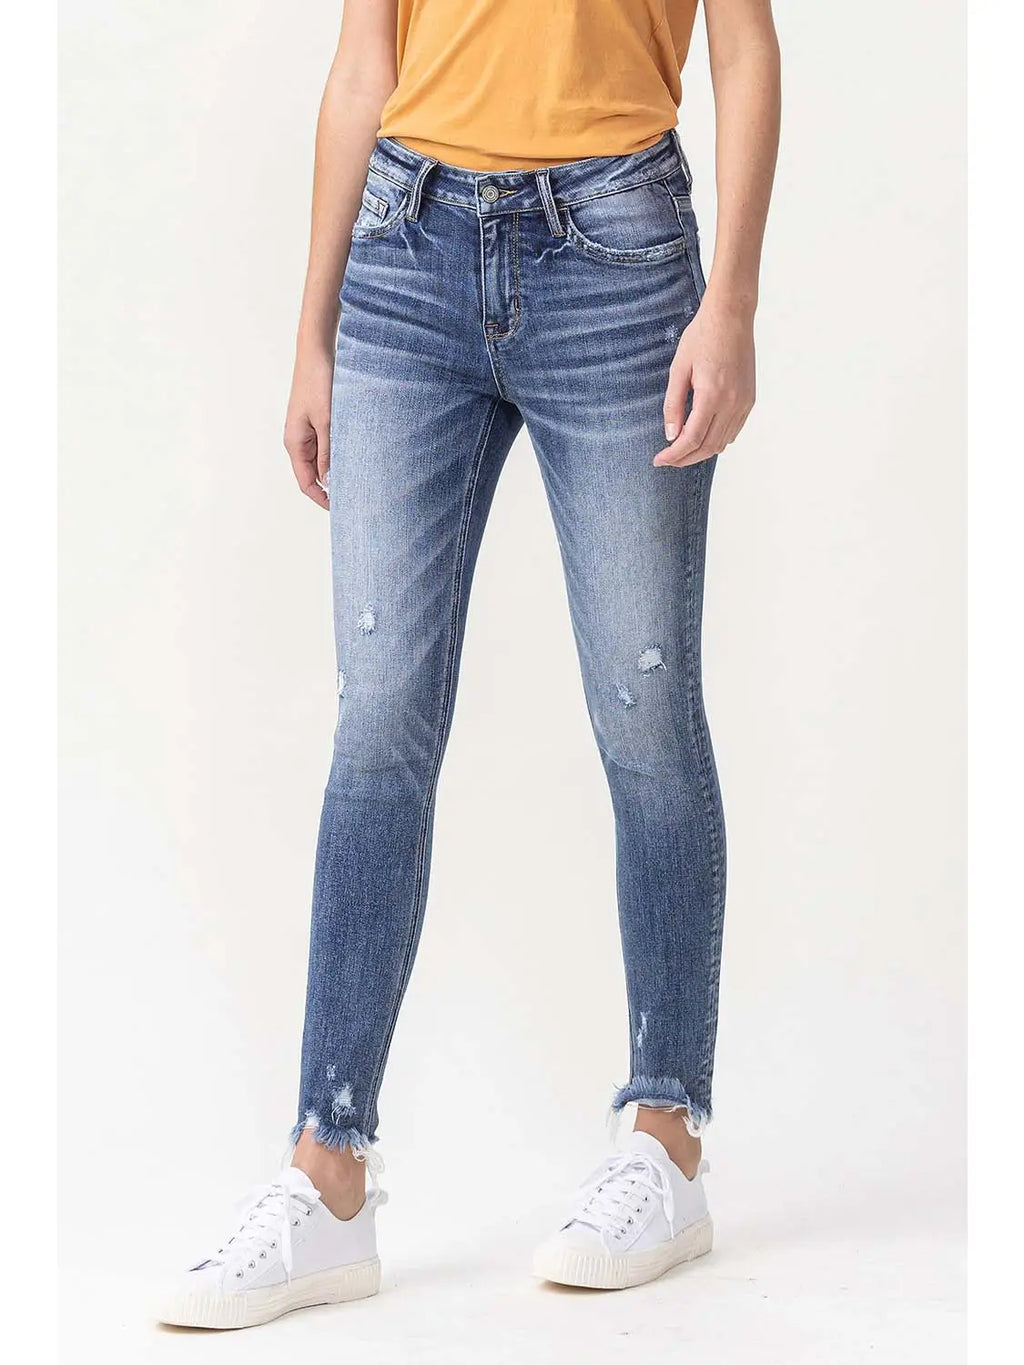 Mid Rise Ankle Skinny Jeans with Frayed Hem Detail